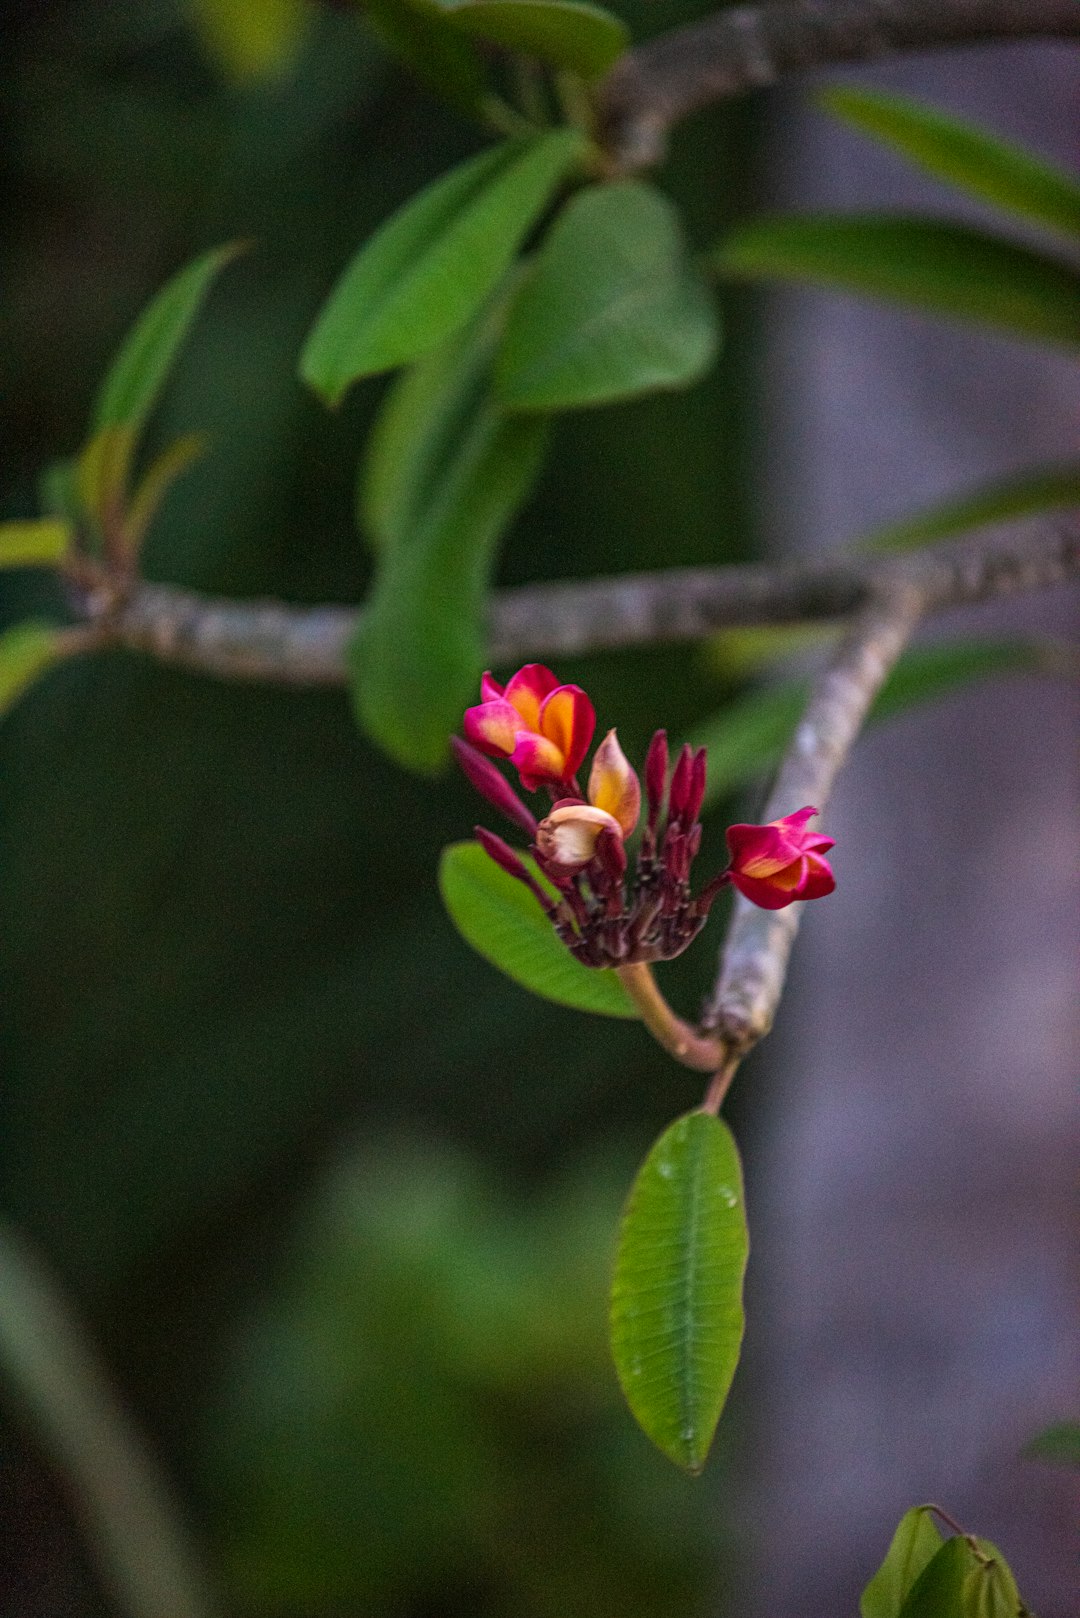 red flower on brown tree branch